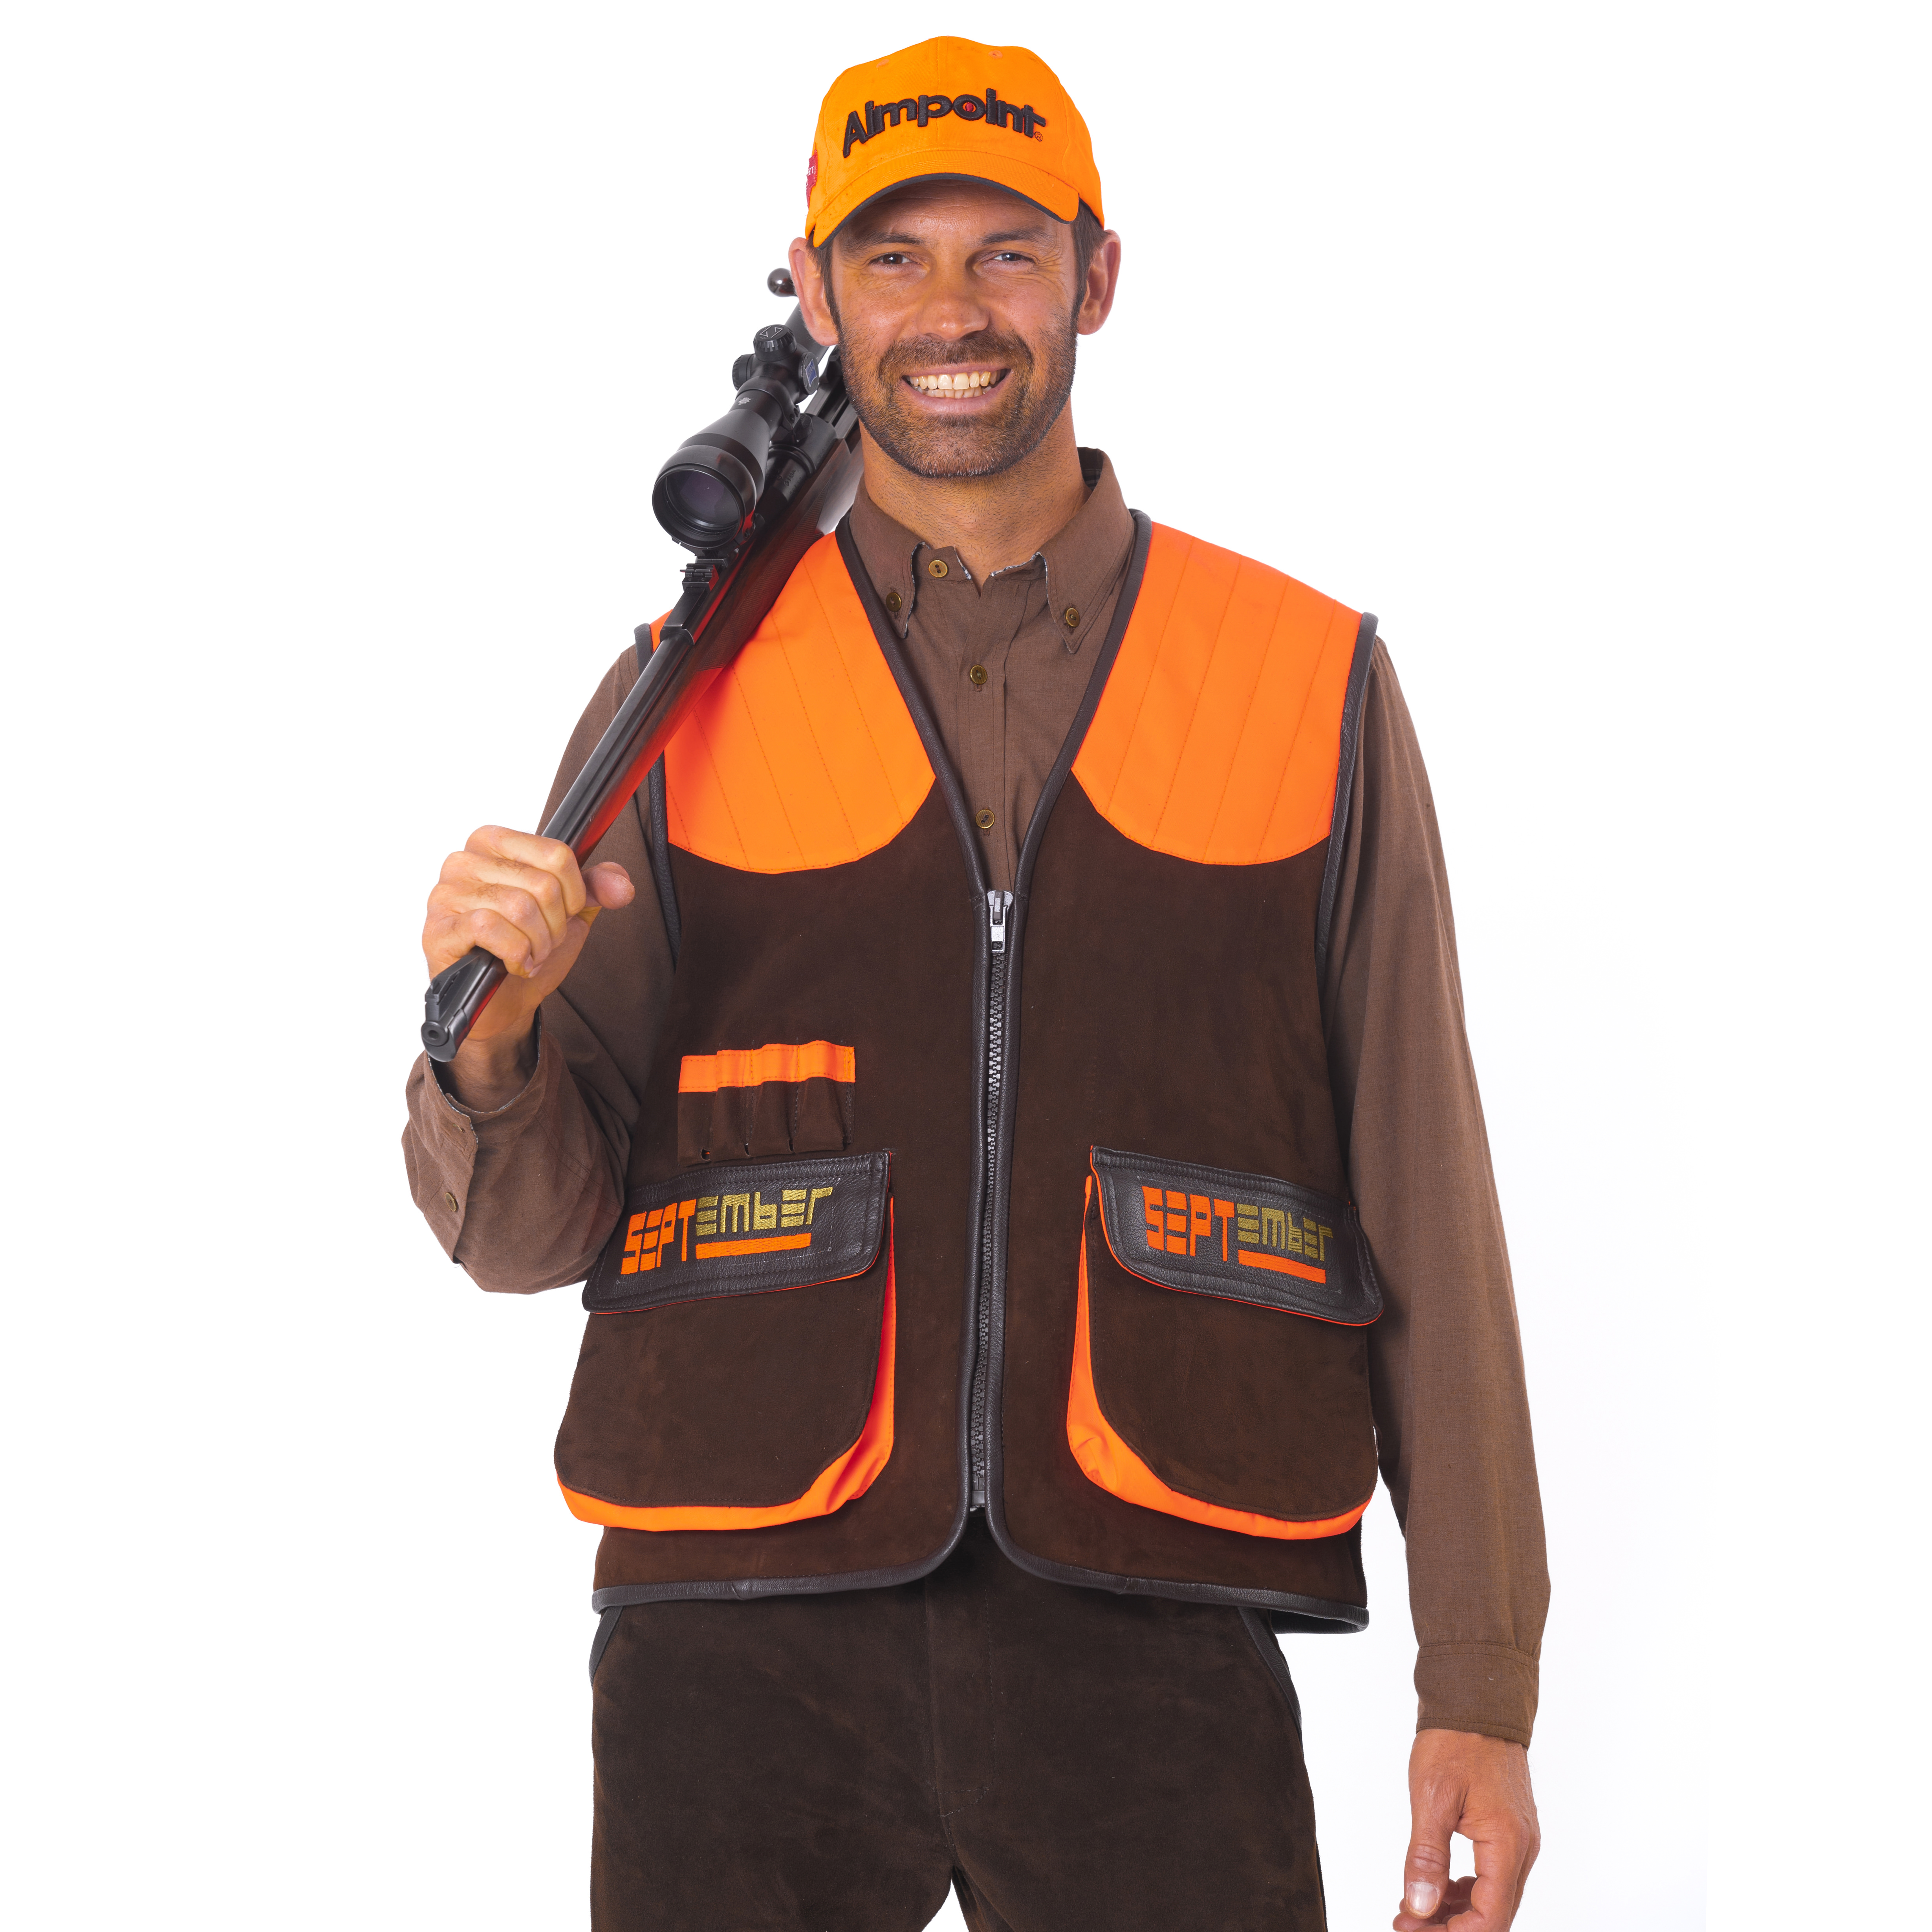 gilet chasse cuir homme